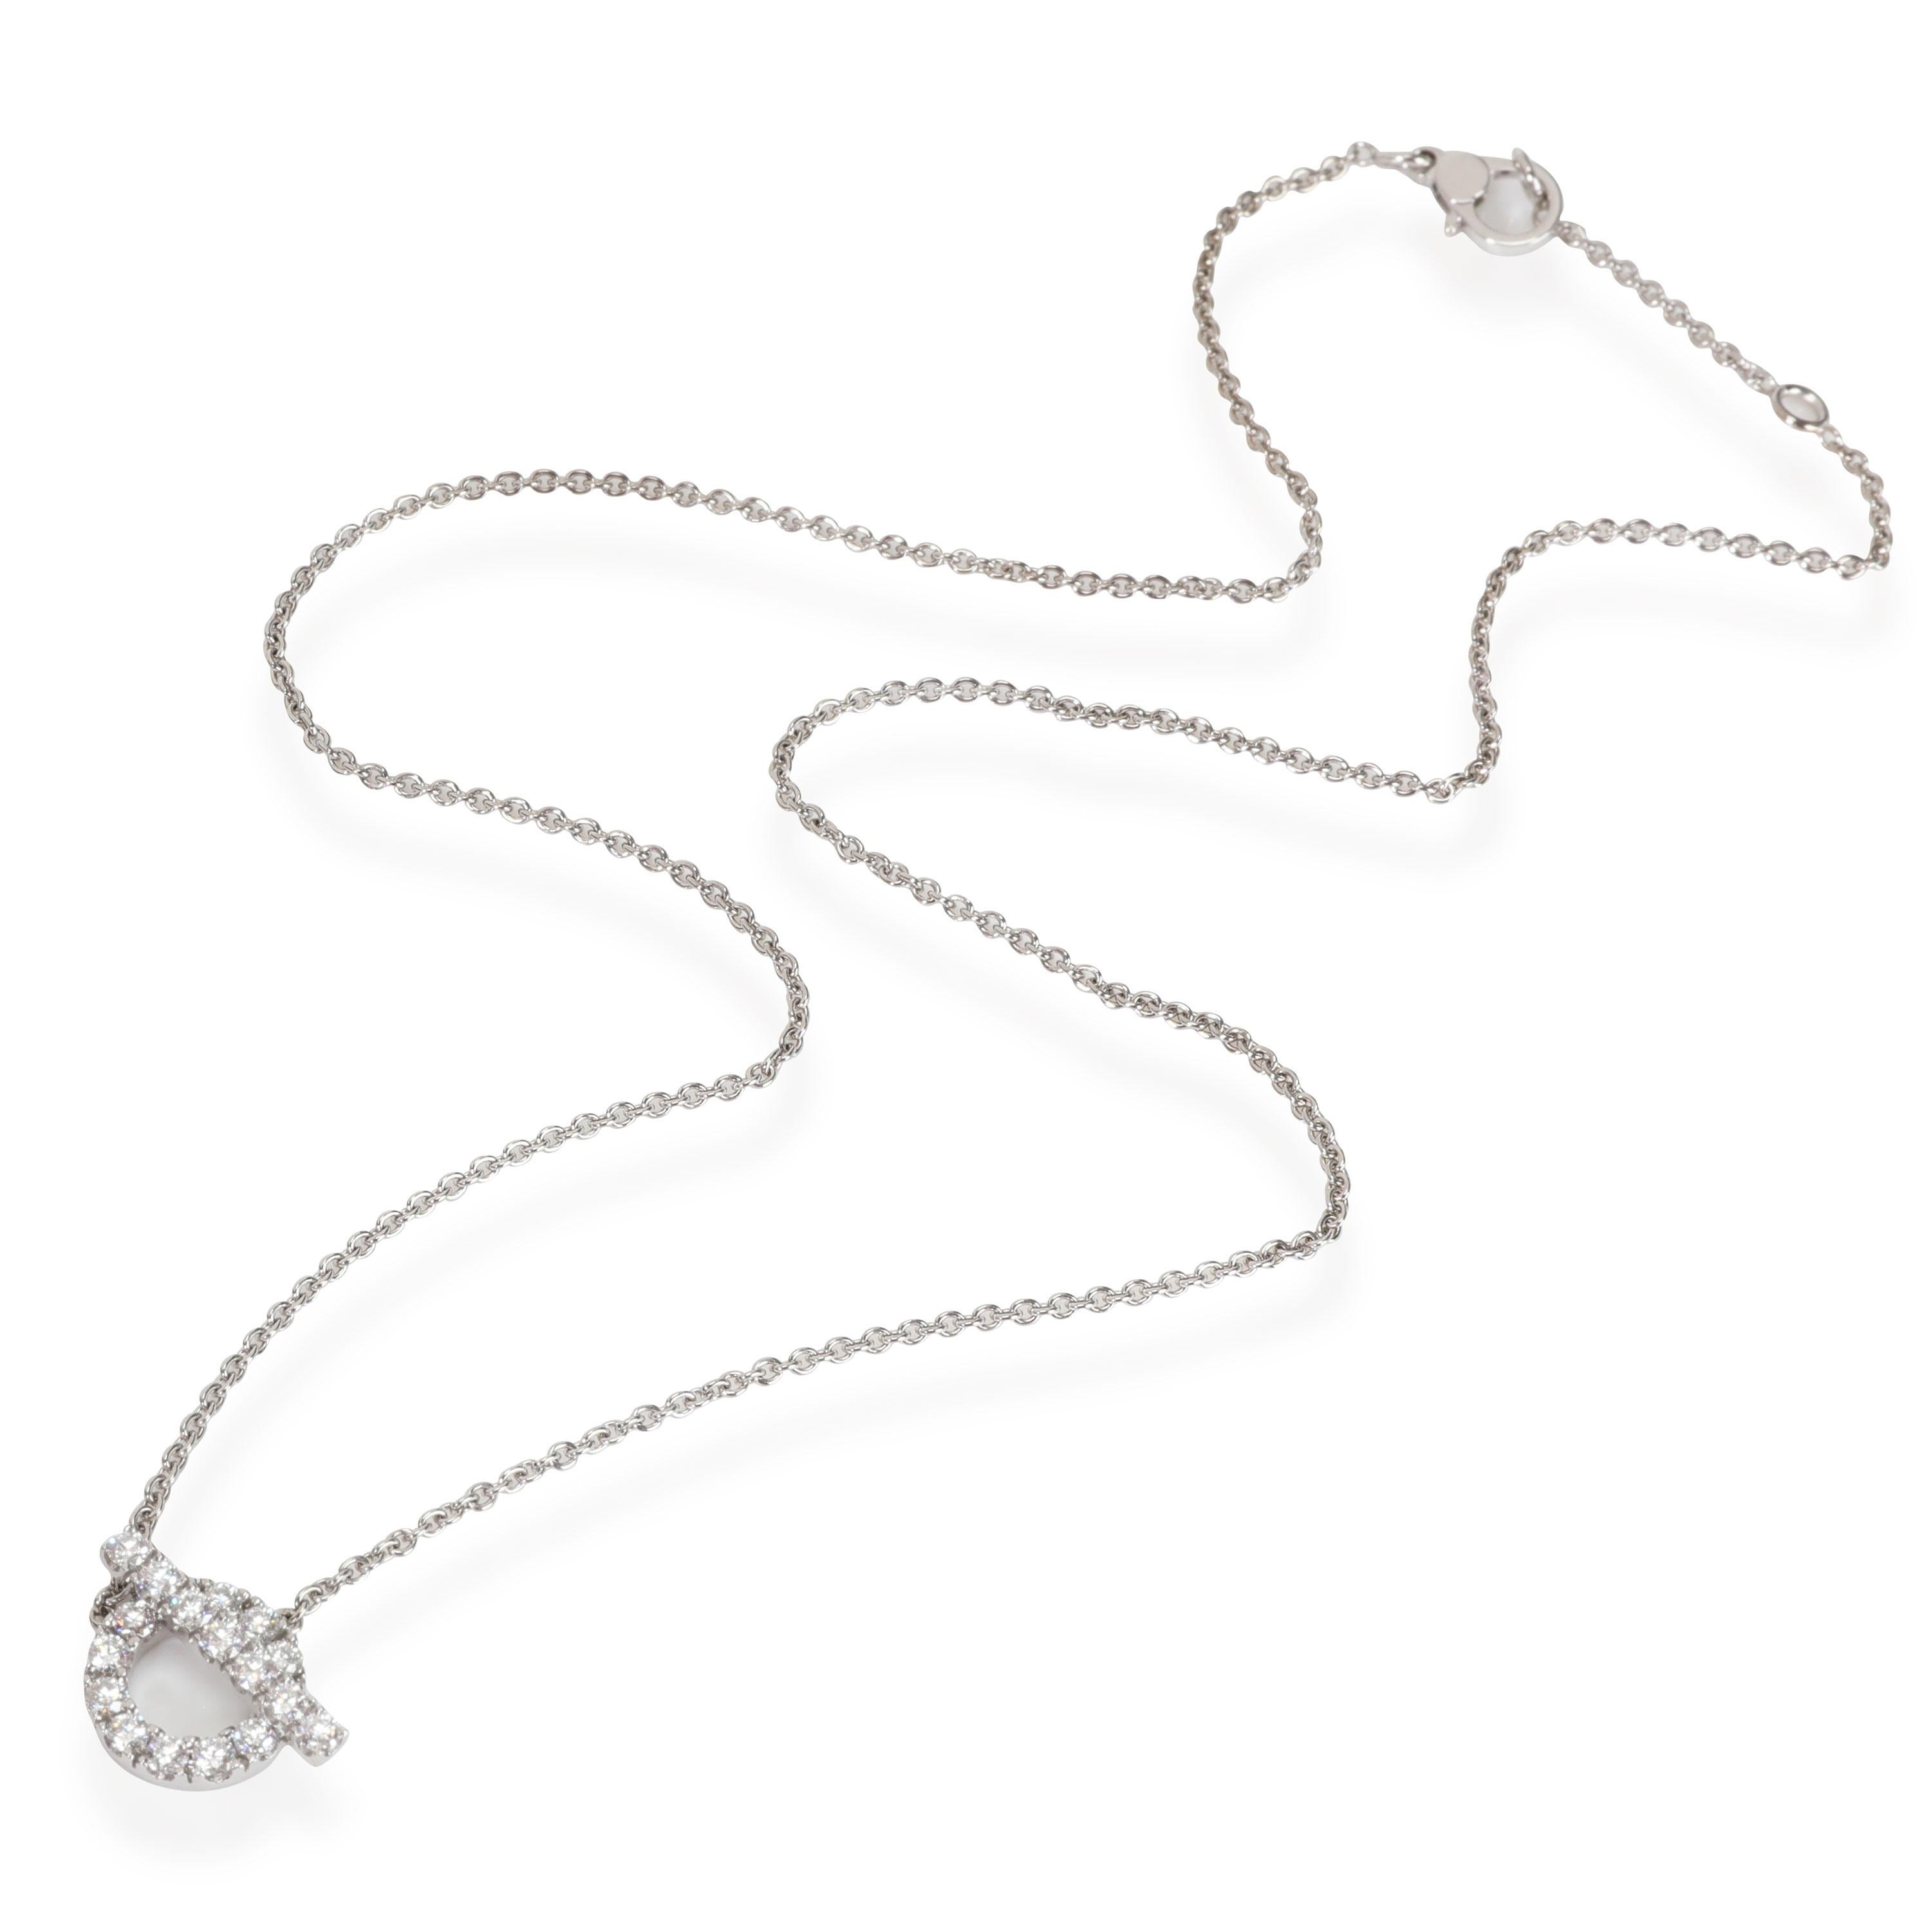 Hermès Finesse Diamond Pendant in 18K White Gold 0.46 CTW

PRIMARY DETAILS
SKU: 113959
Listing Title: Hermès Finesse Diamond Pendant in 18K White Gold 0.46 CTW
Condition Description: Length is adjustable. Retails for USD 5250. Recently polished and